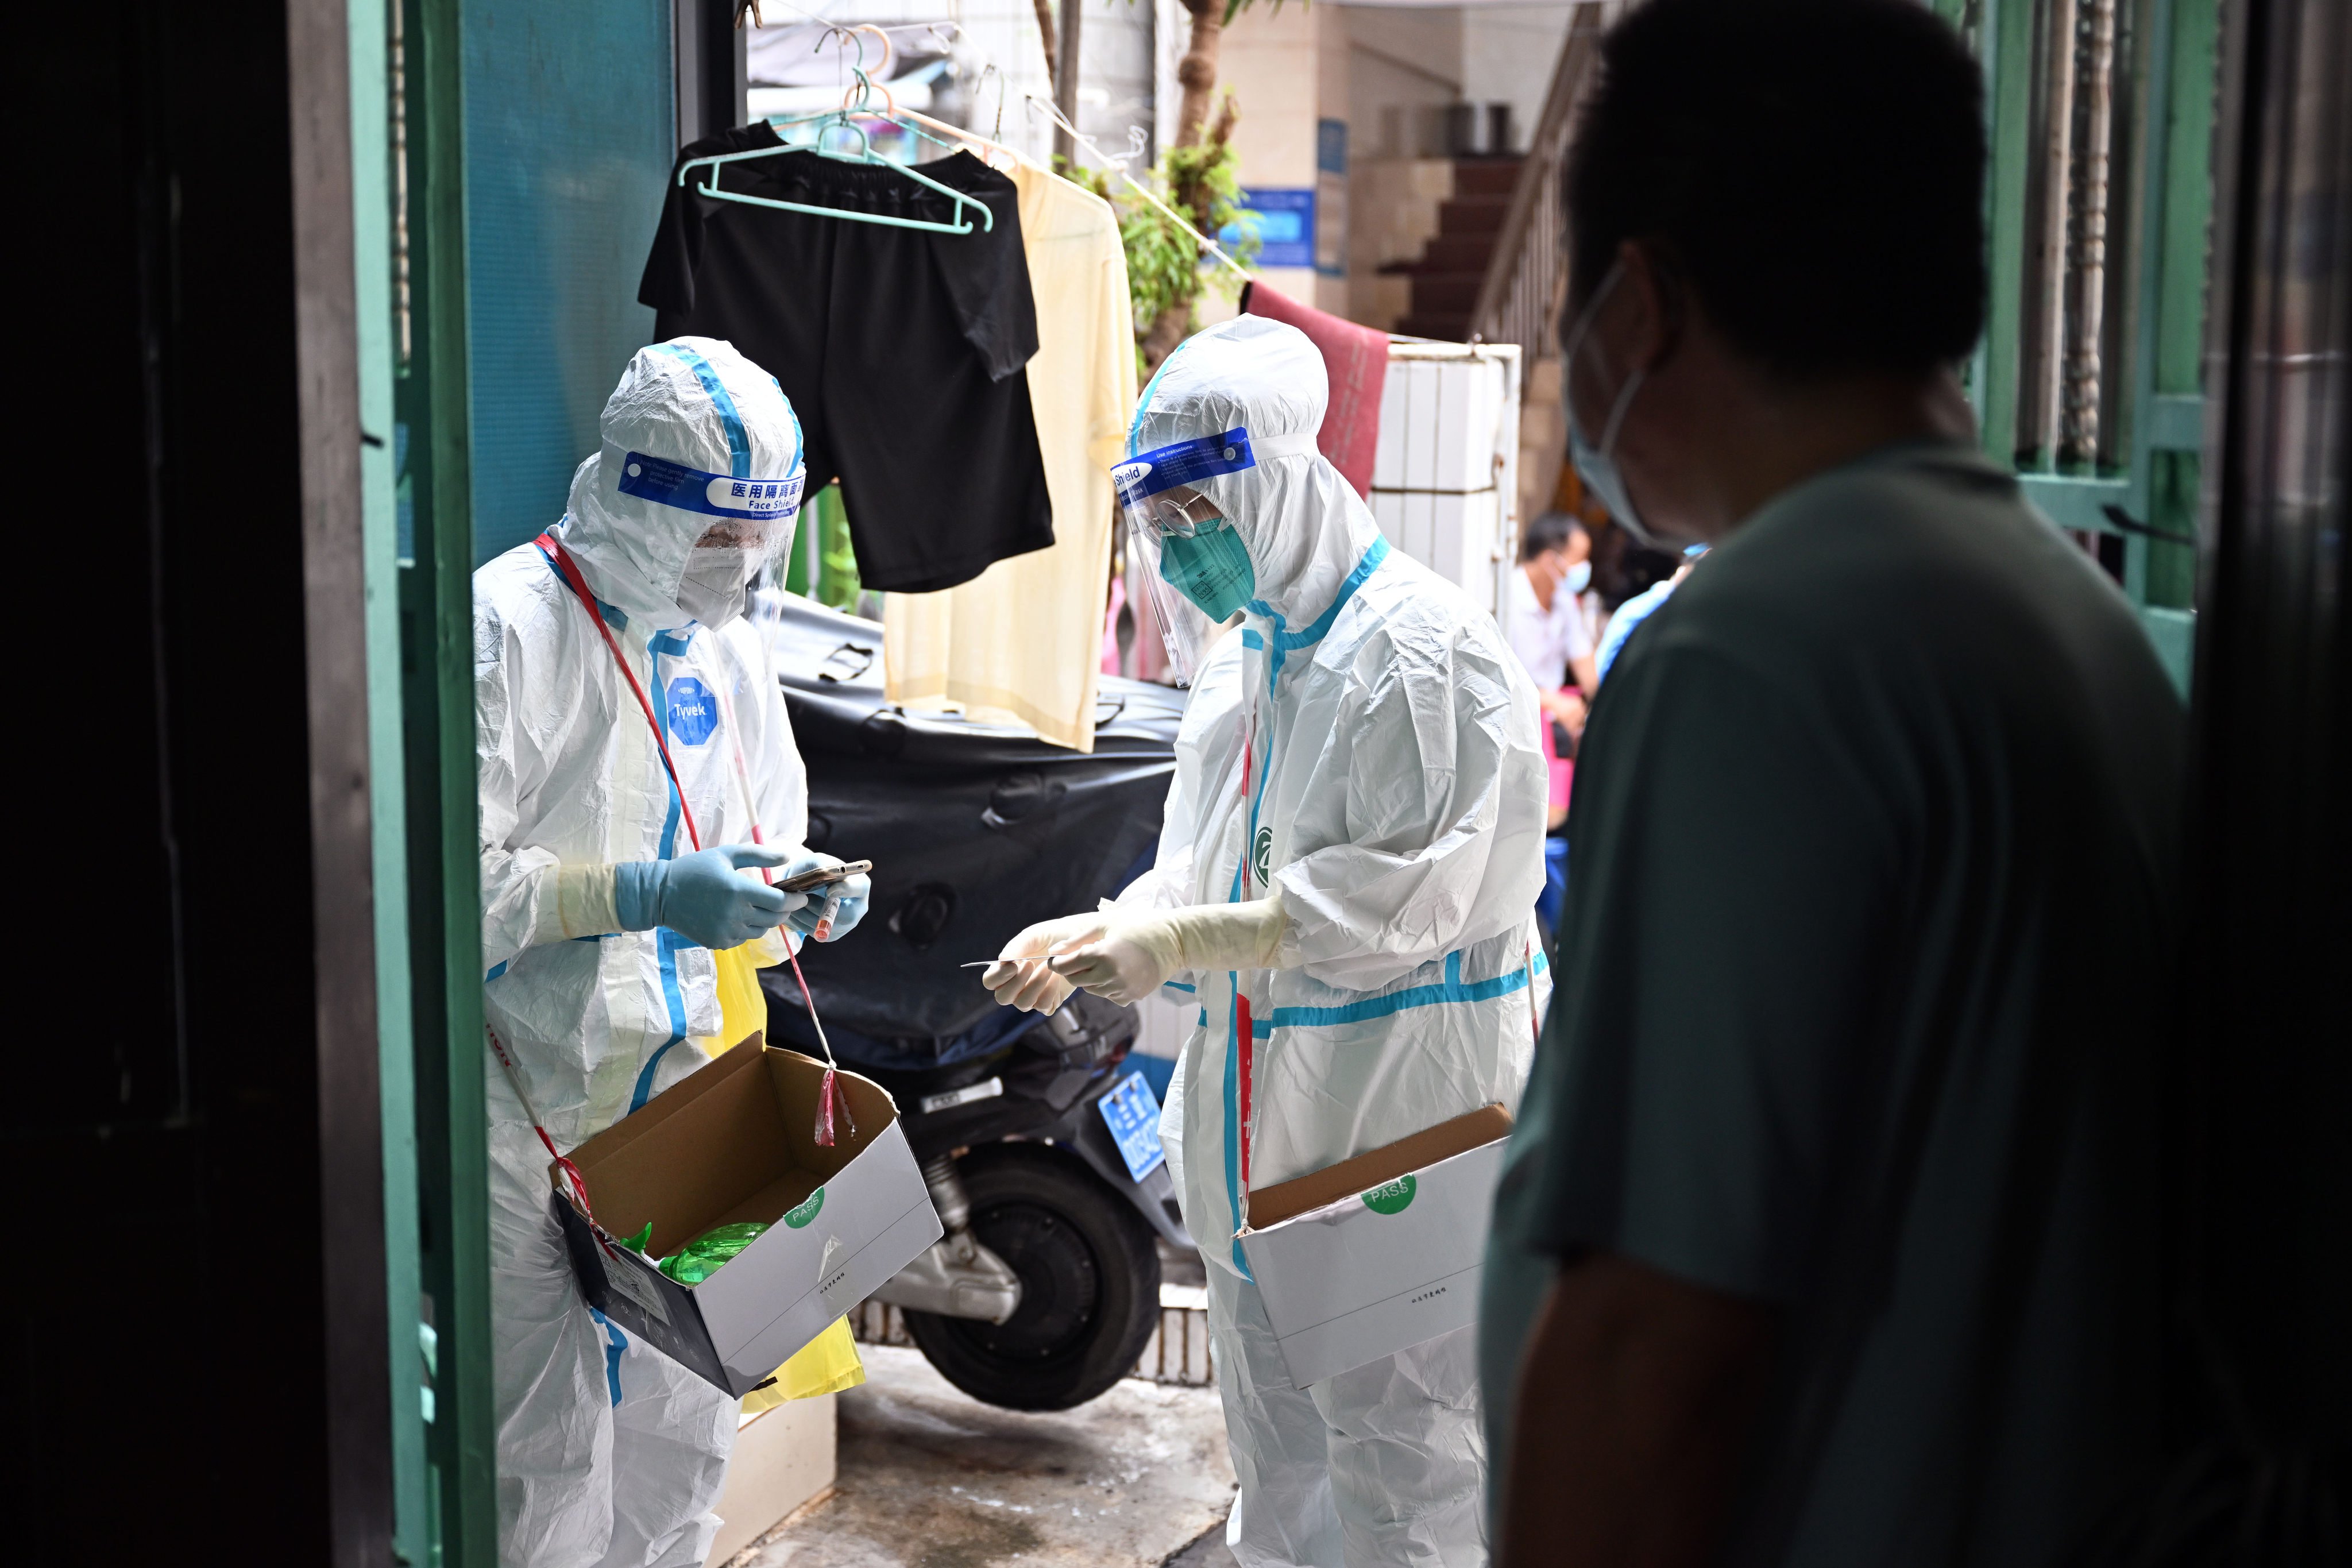 Medical workers go door-to-door in Sanya, Hainan province, to take swab samples for Covid-19 testing amid the city’s lockdown earlier this month. Photo: Xinhua